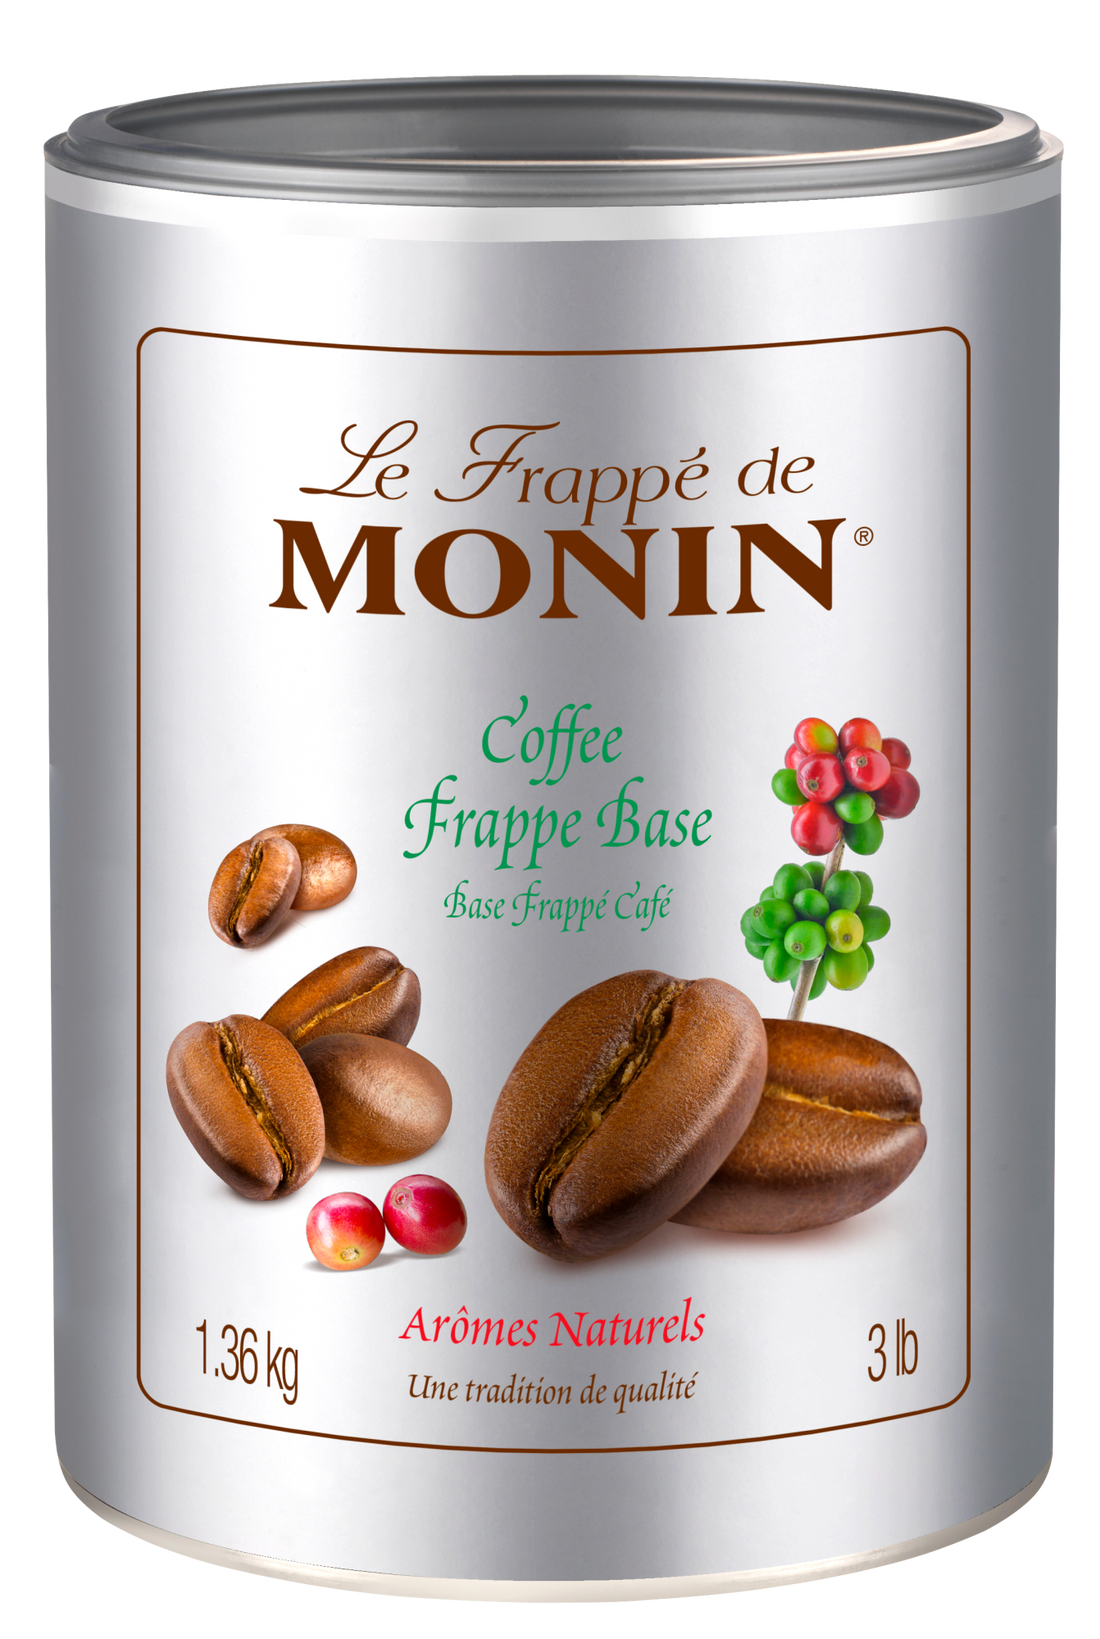 Buy MONIN Coffee Frappe Mix. It is made with carefully selected ingredients to match premium quality standards. 